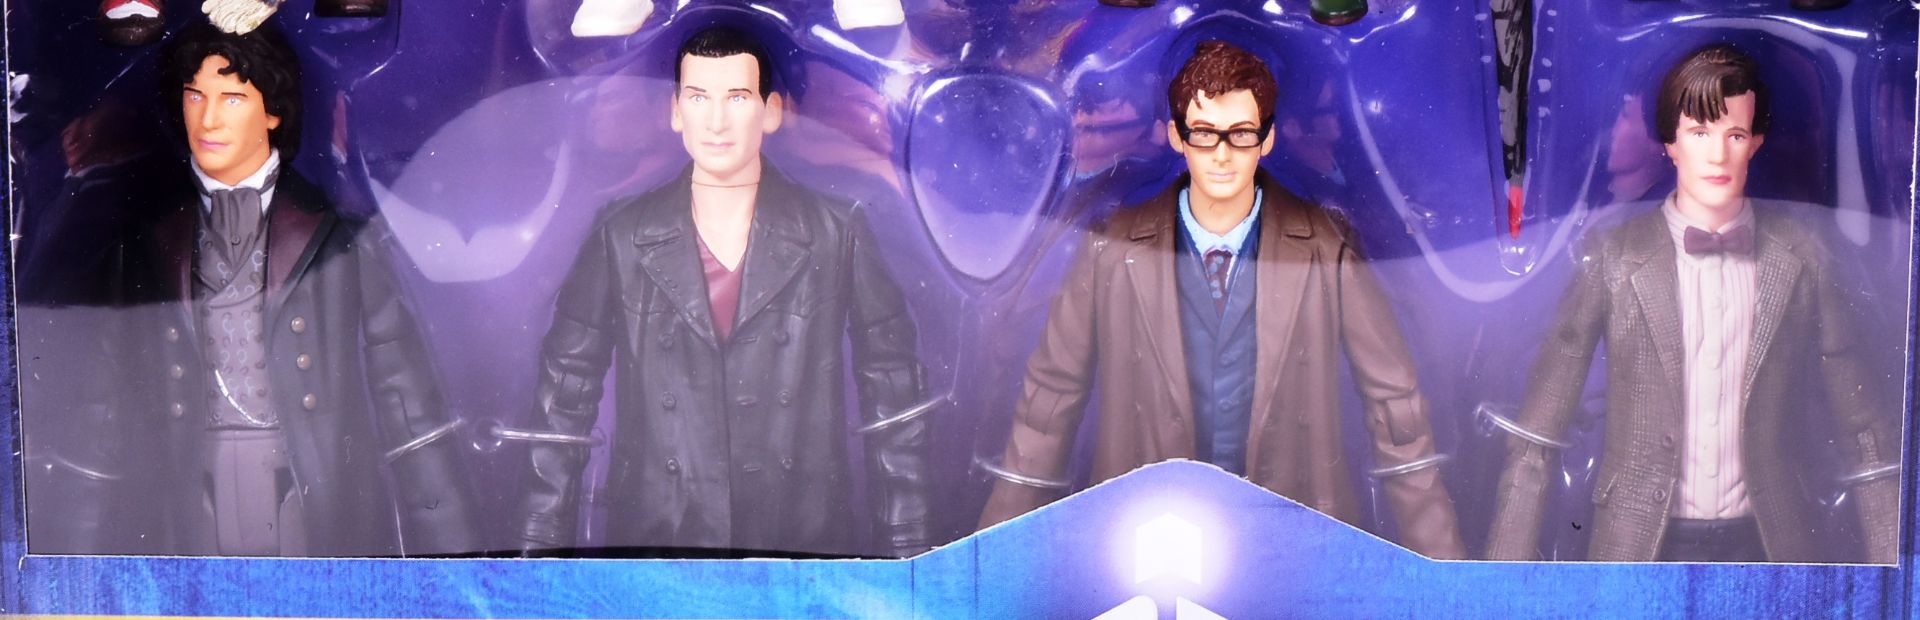 DOCTOR WHO - CHARACTER OPTIONS - ELEVEN DOCTOR FIGURE SET - Image 5 of 6